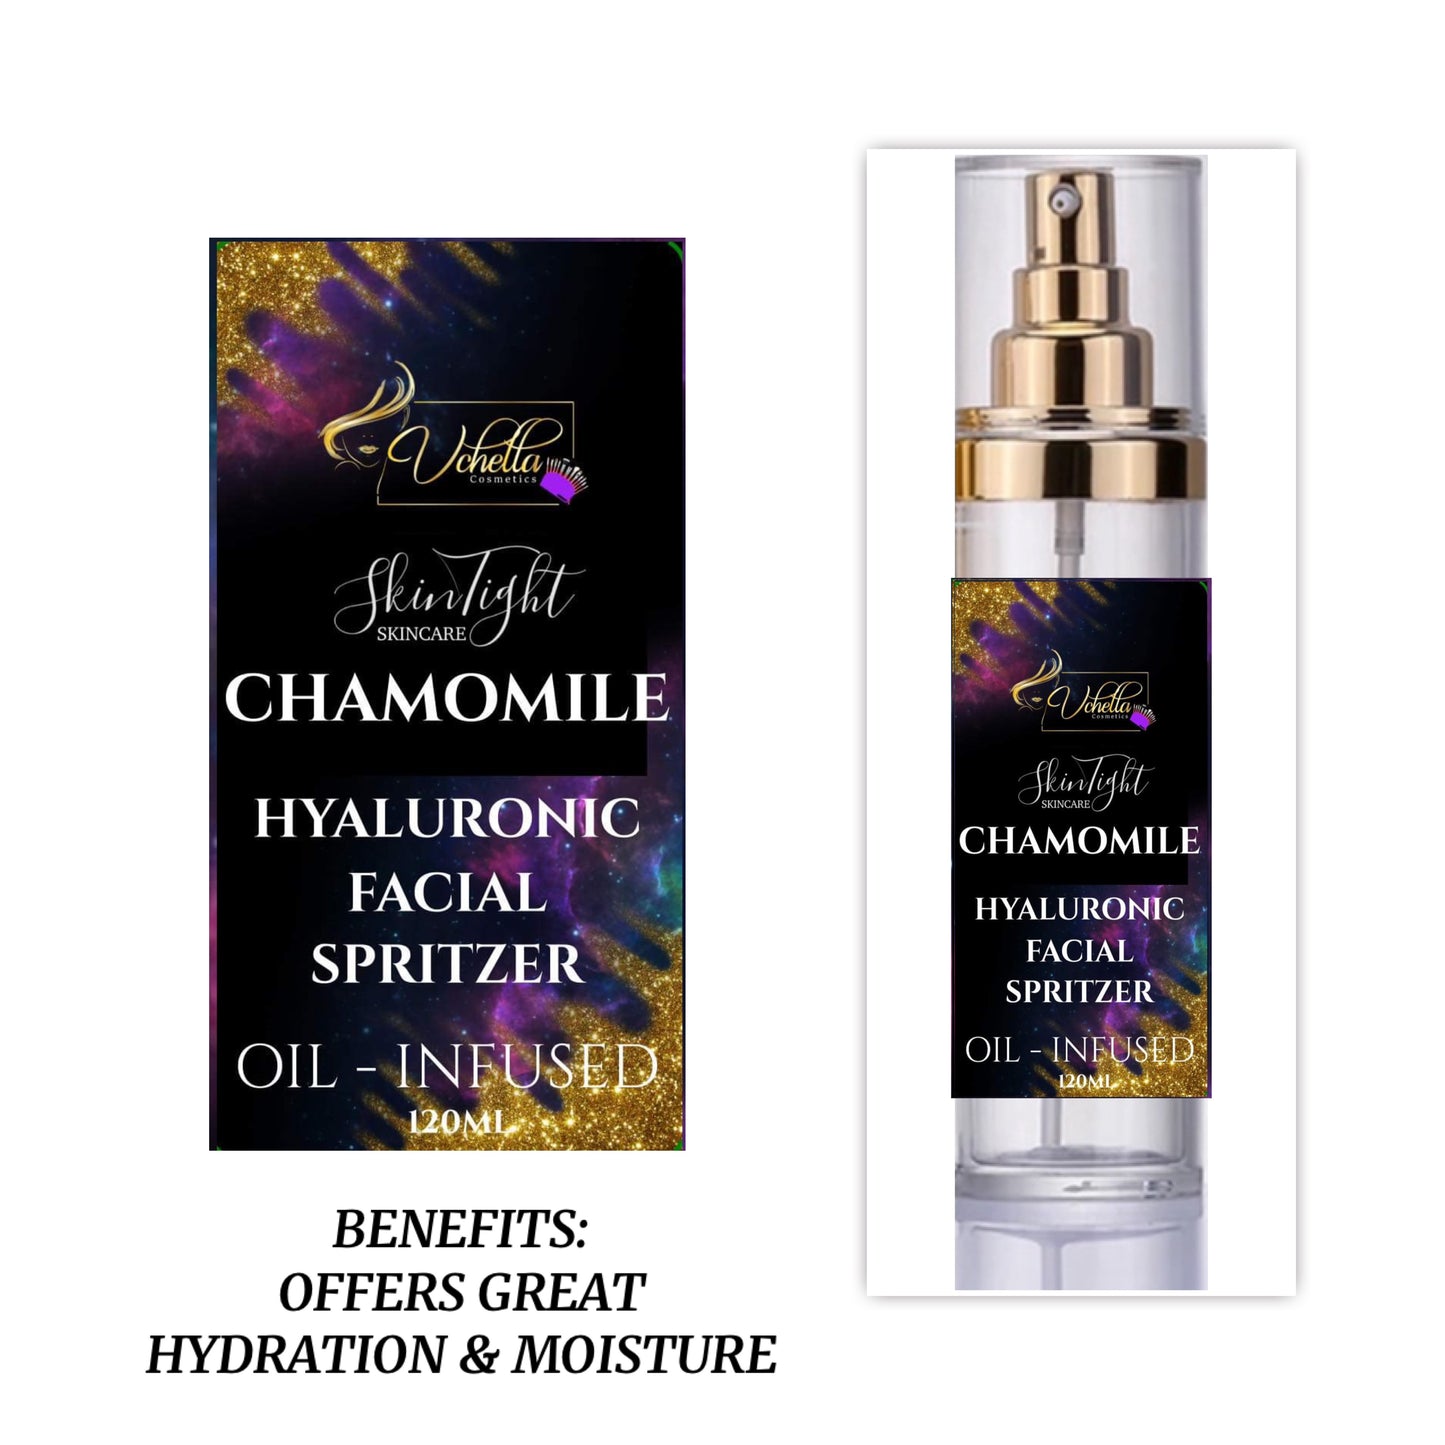 SKIN TIGHT HYALURONIC FACIAL SPRITZERS